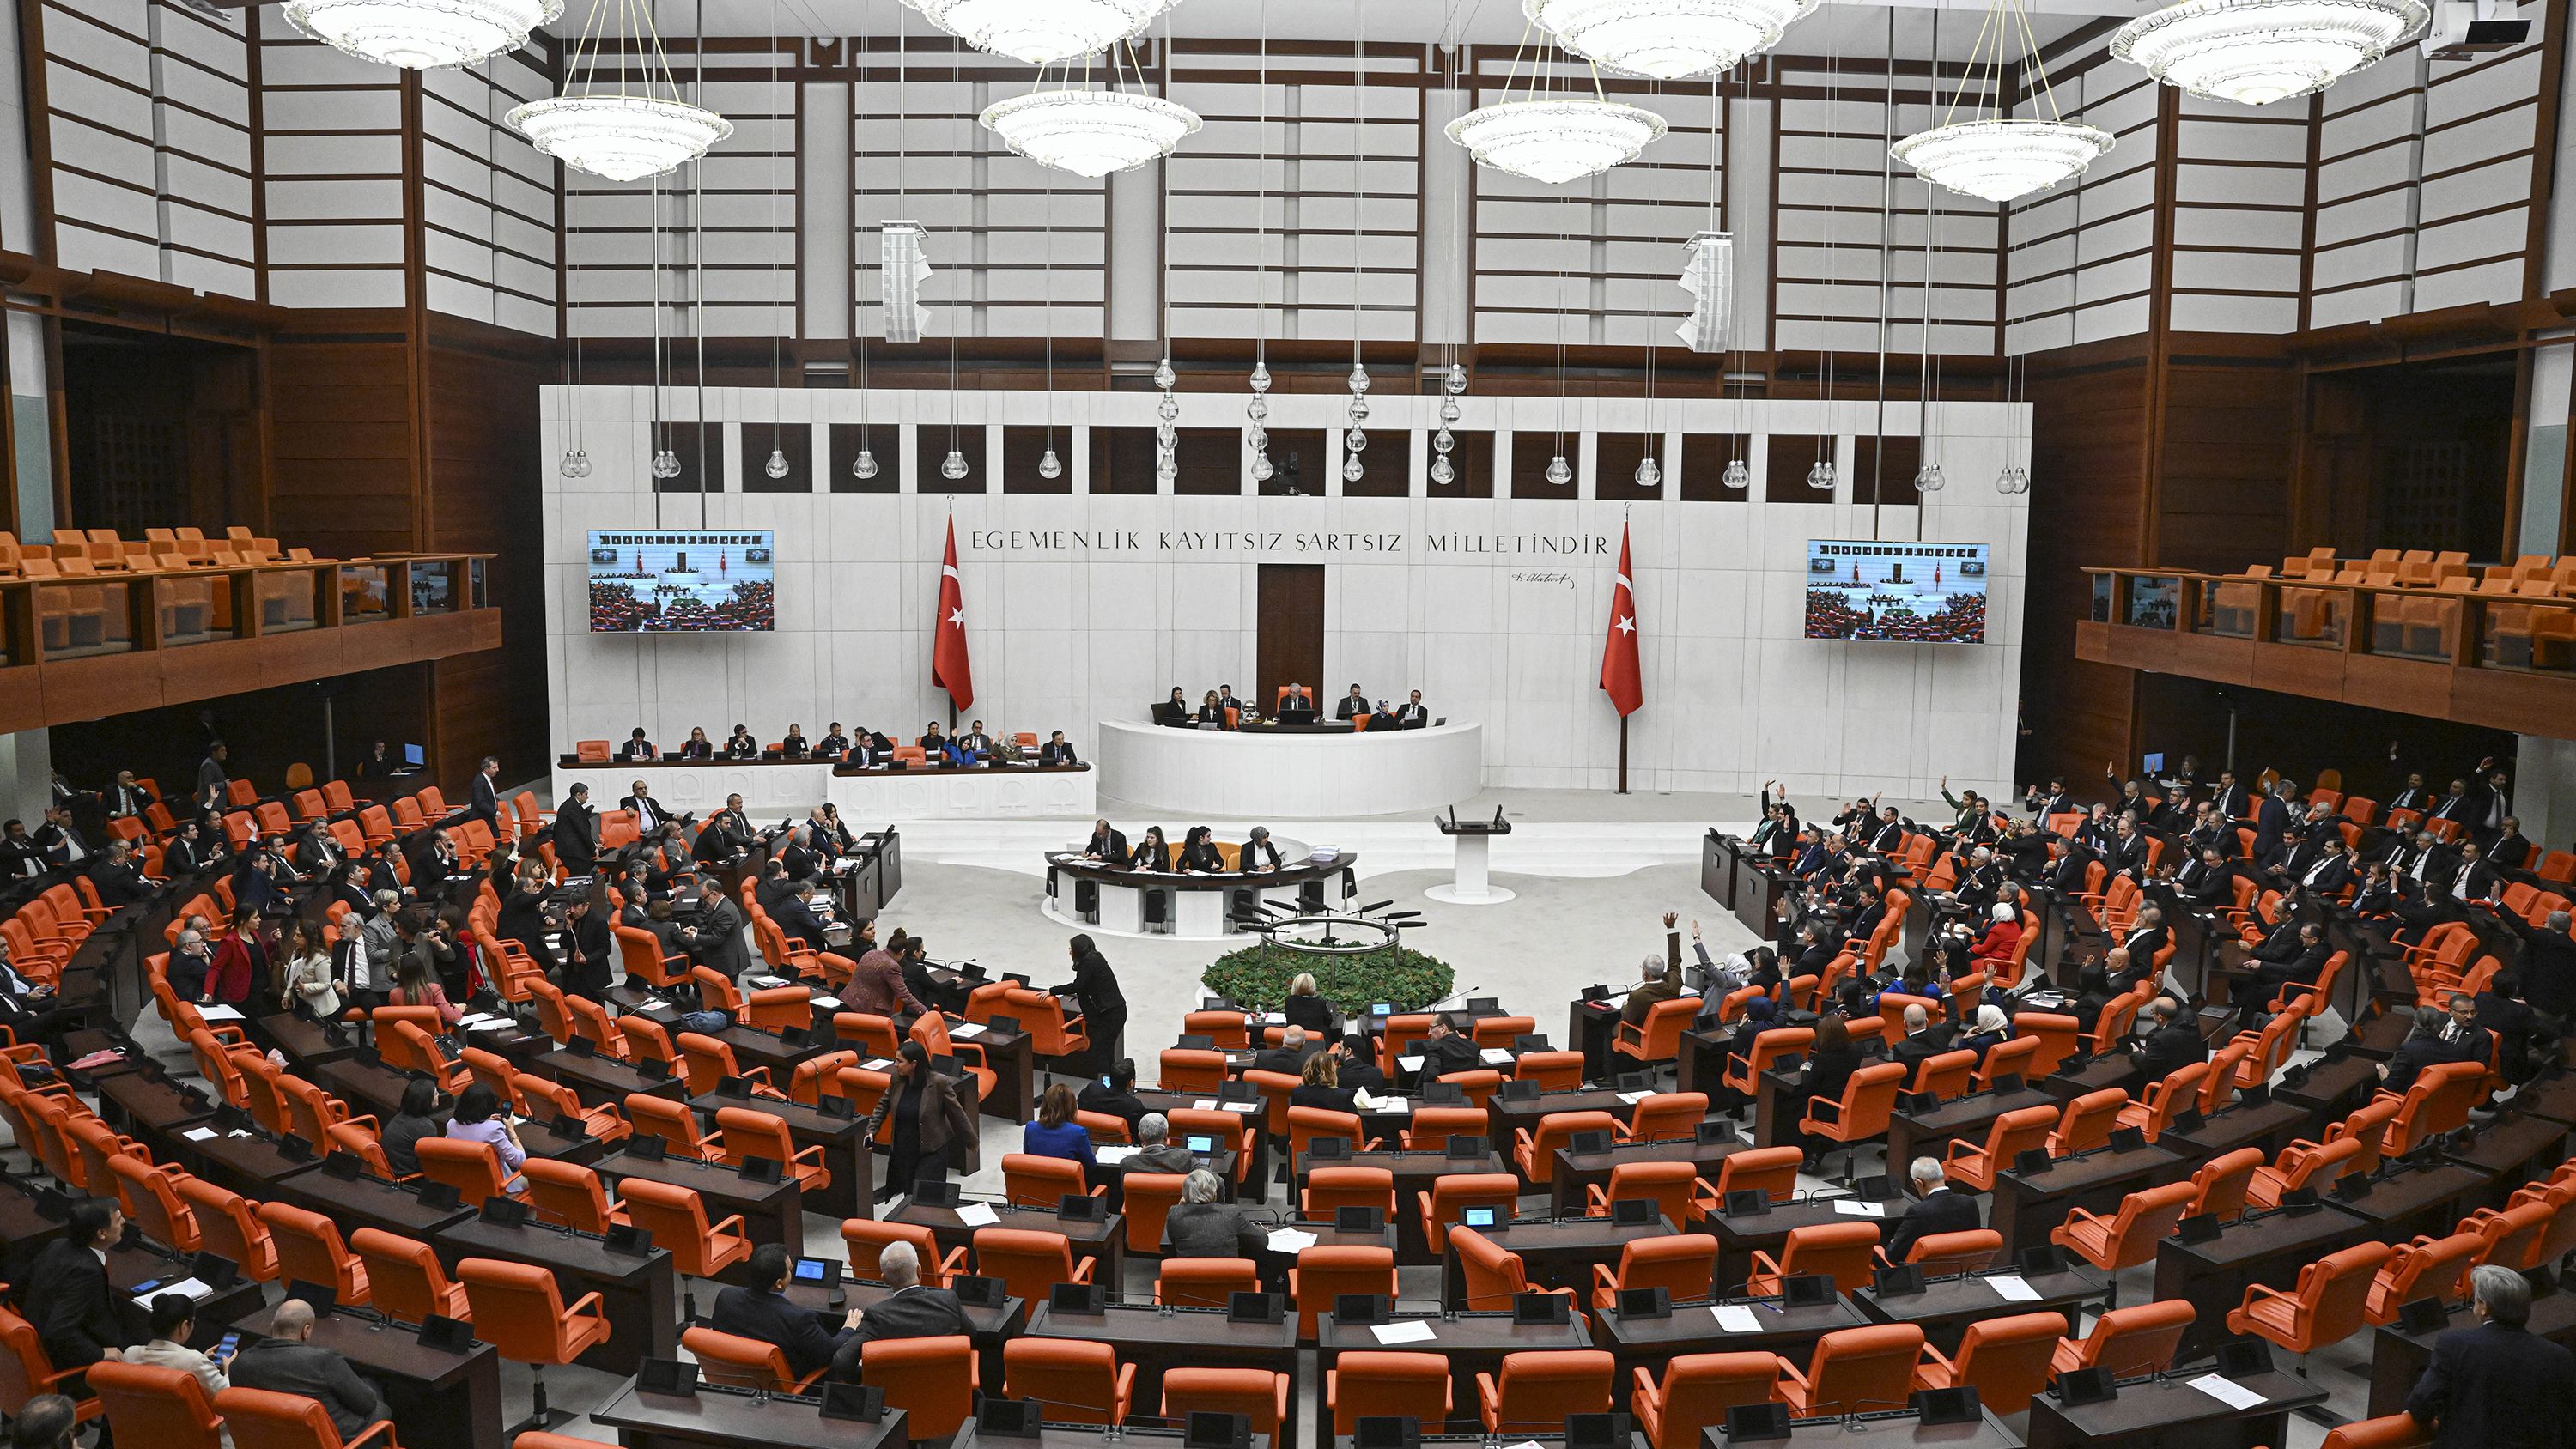 ANKARA, TURKIYE - JANUARY 23: A general view of the Turkish parliament during the voting session on the bill regarding Sweden's accession protocol to the North Atlantic Treaty Organization (NATO) in Ankara, Turkiye on January 23, 2024. Turkish parliament approved Sweden's membership of NATO. (Photo by Metin Aktas/Anadolu via Getty Images)